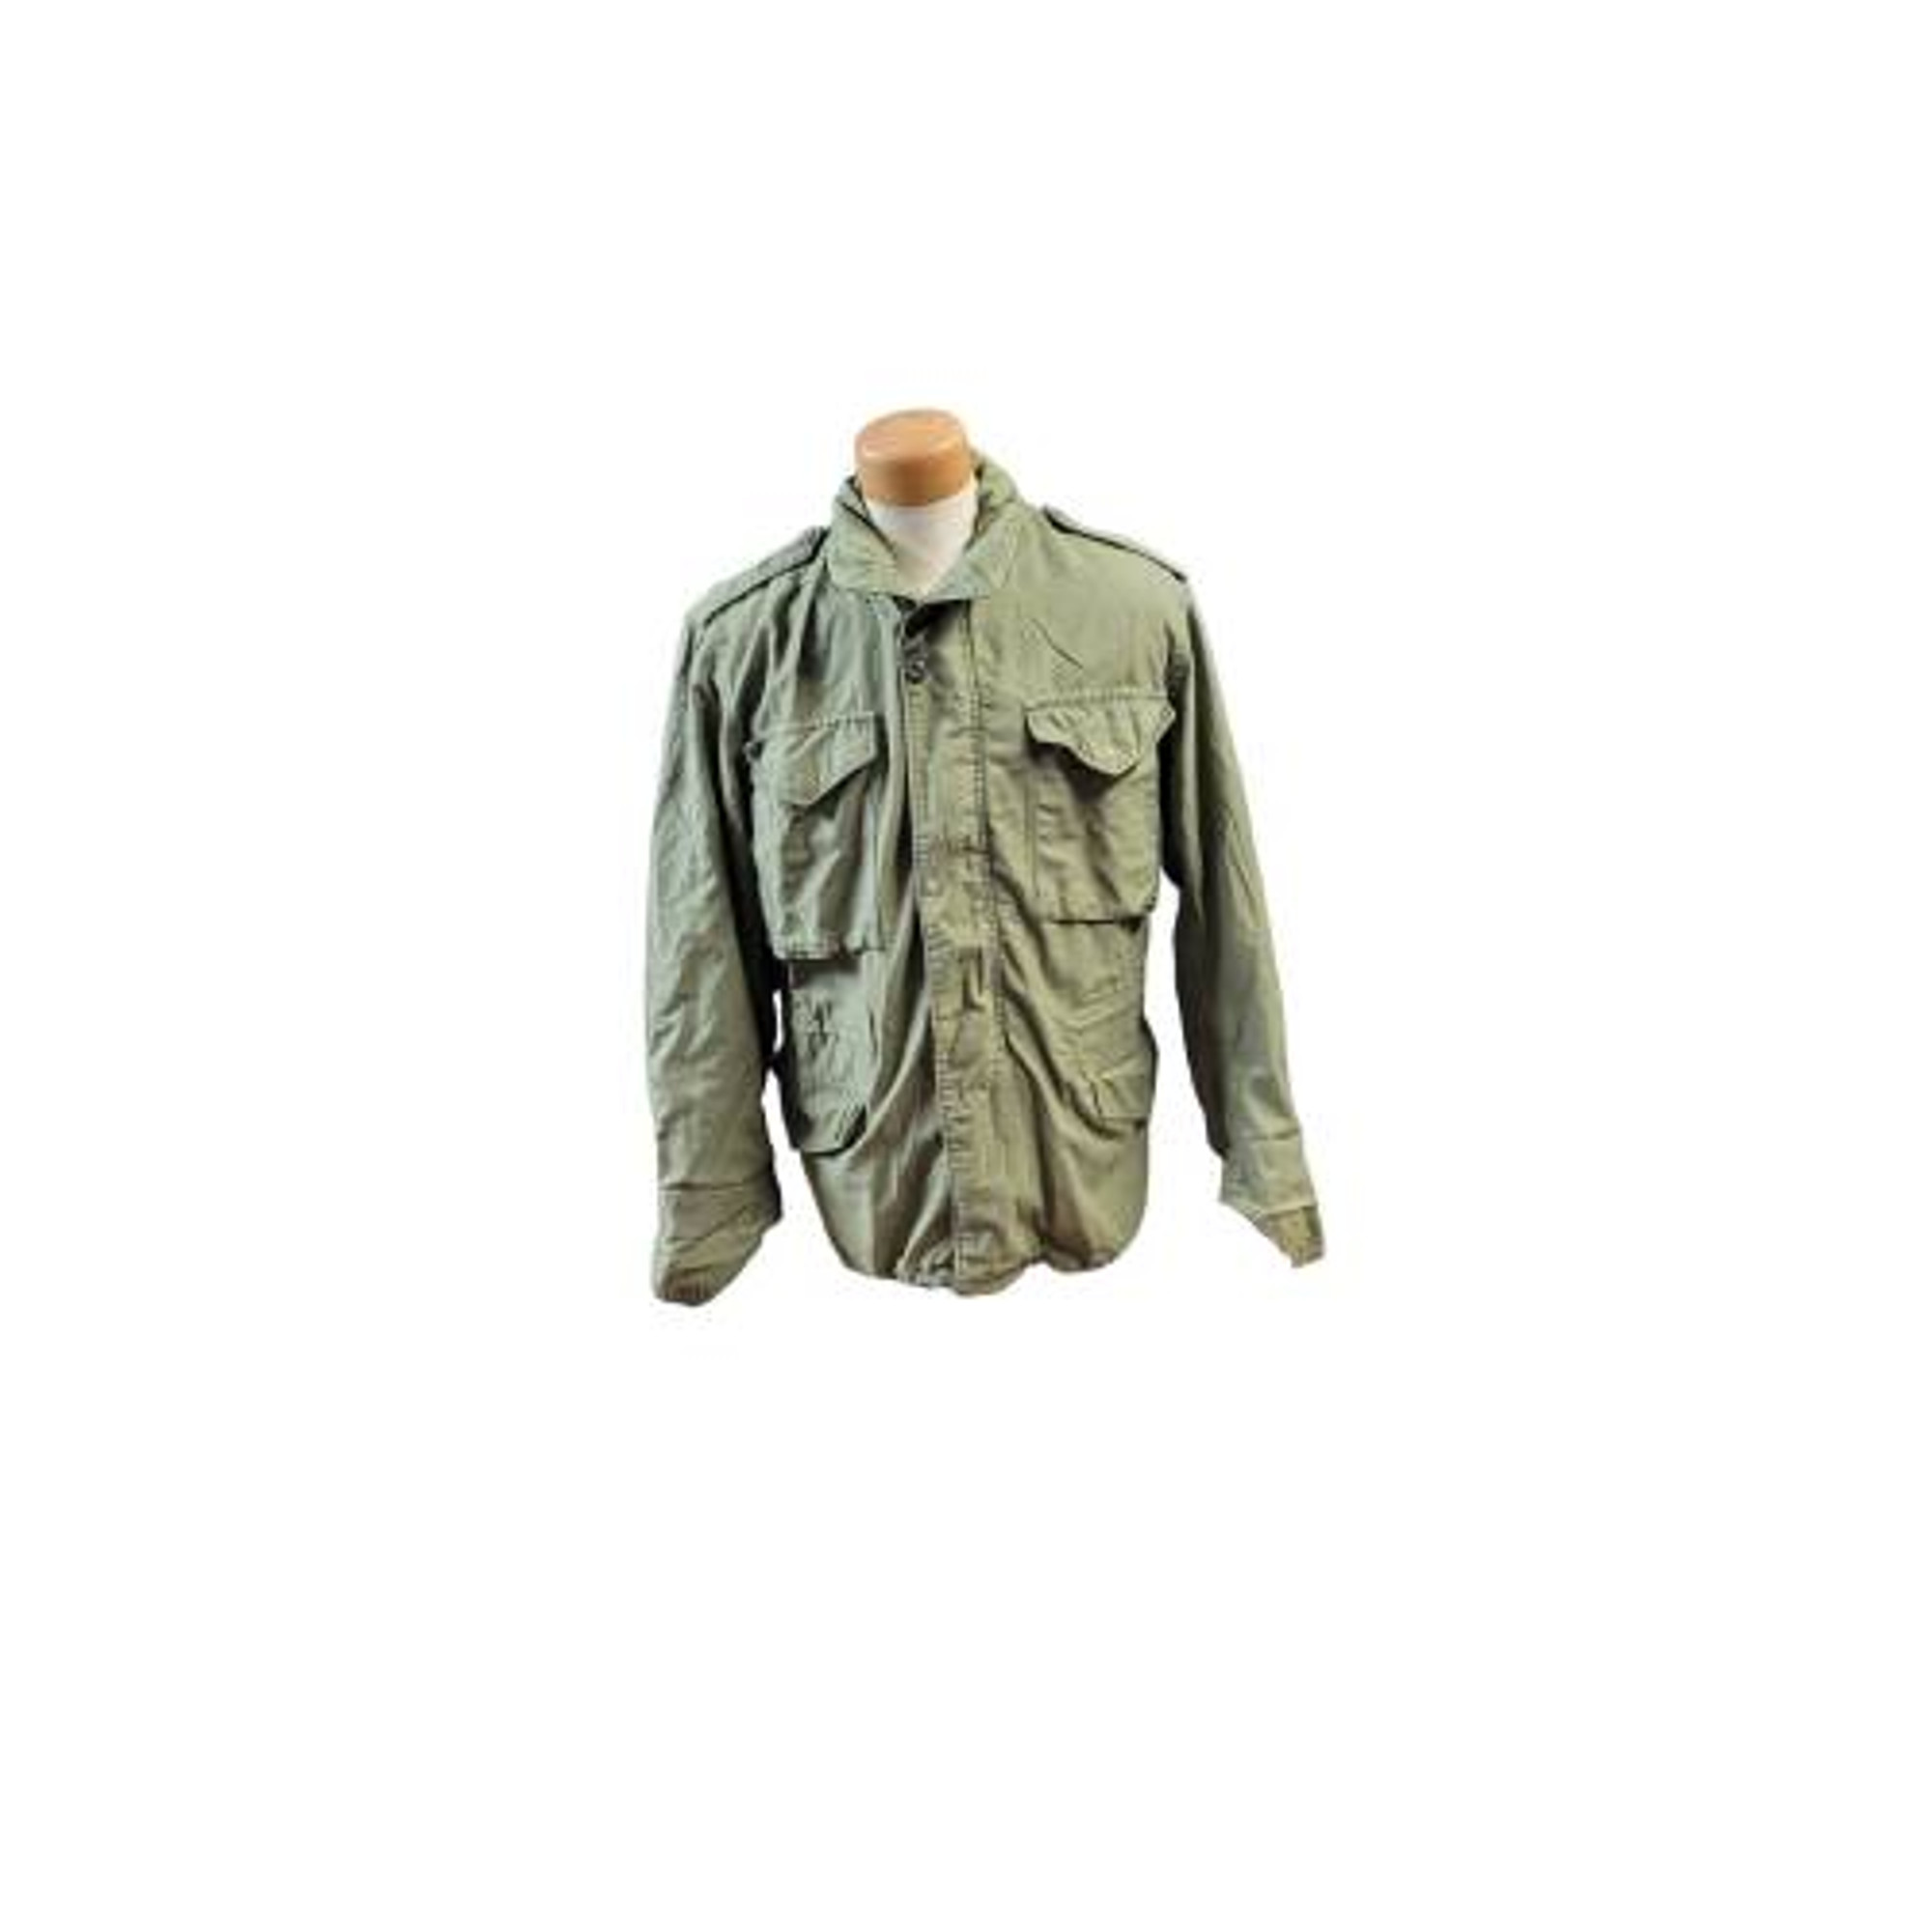 U.S. Armed Forces Authentic M-65 Field Jacket